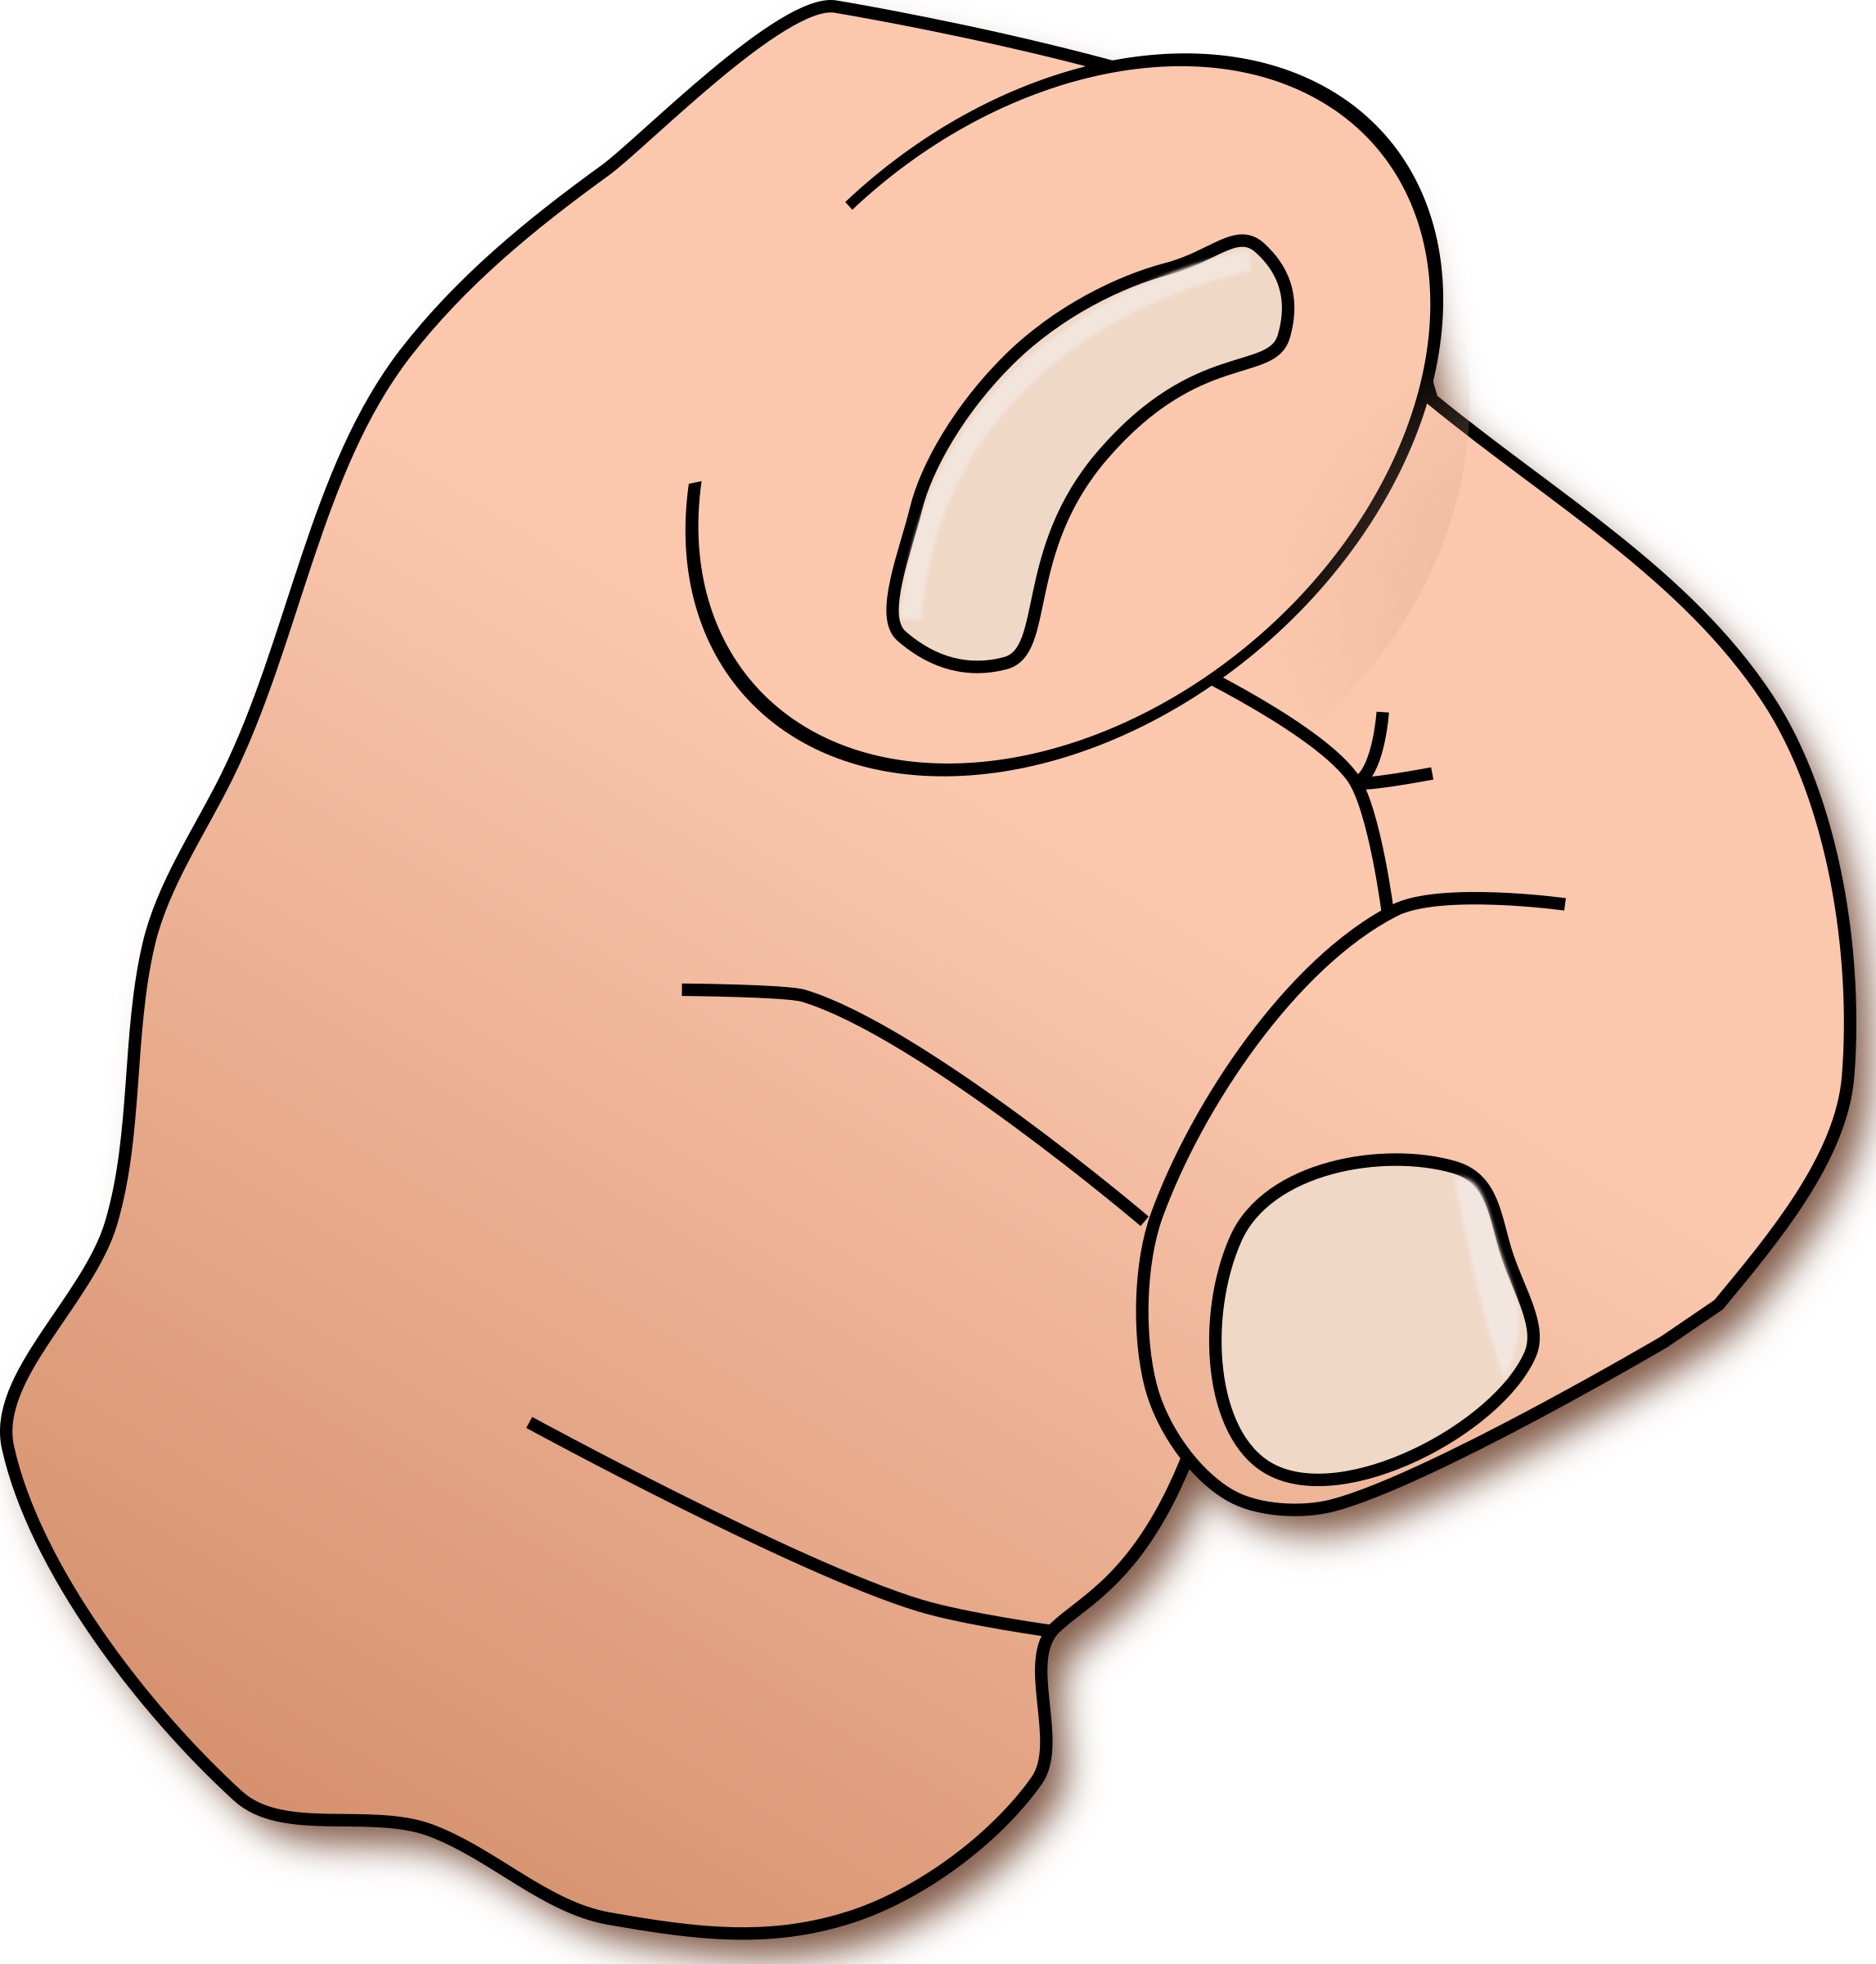 Pointing big image png. Finger clipart nice hand